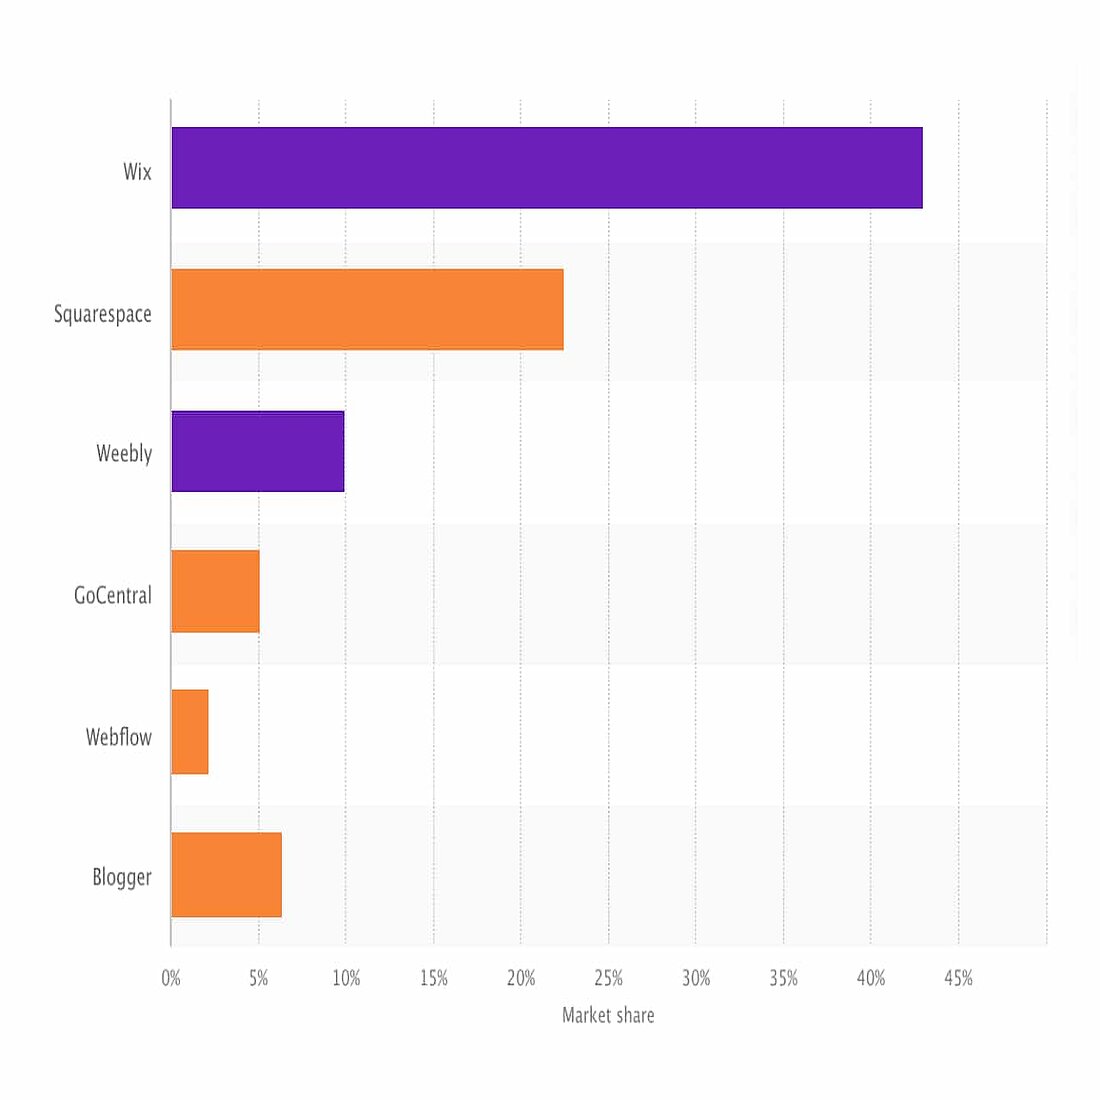 Popularity of Wix and Weebly 